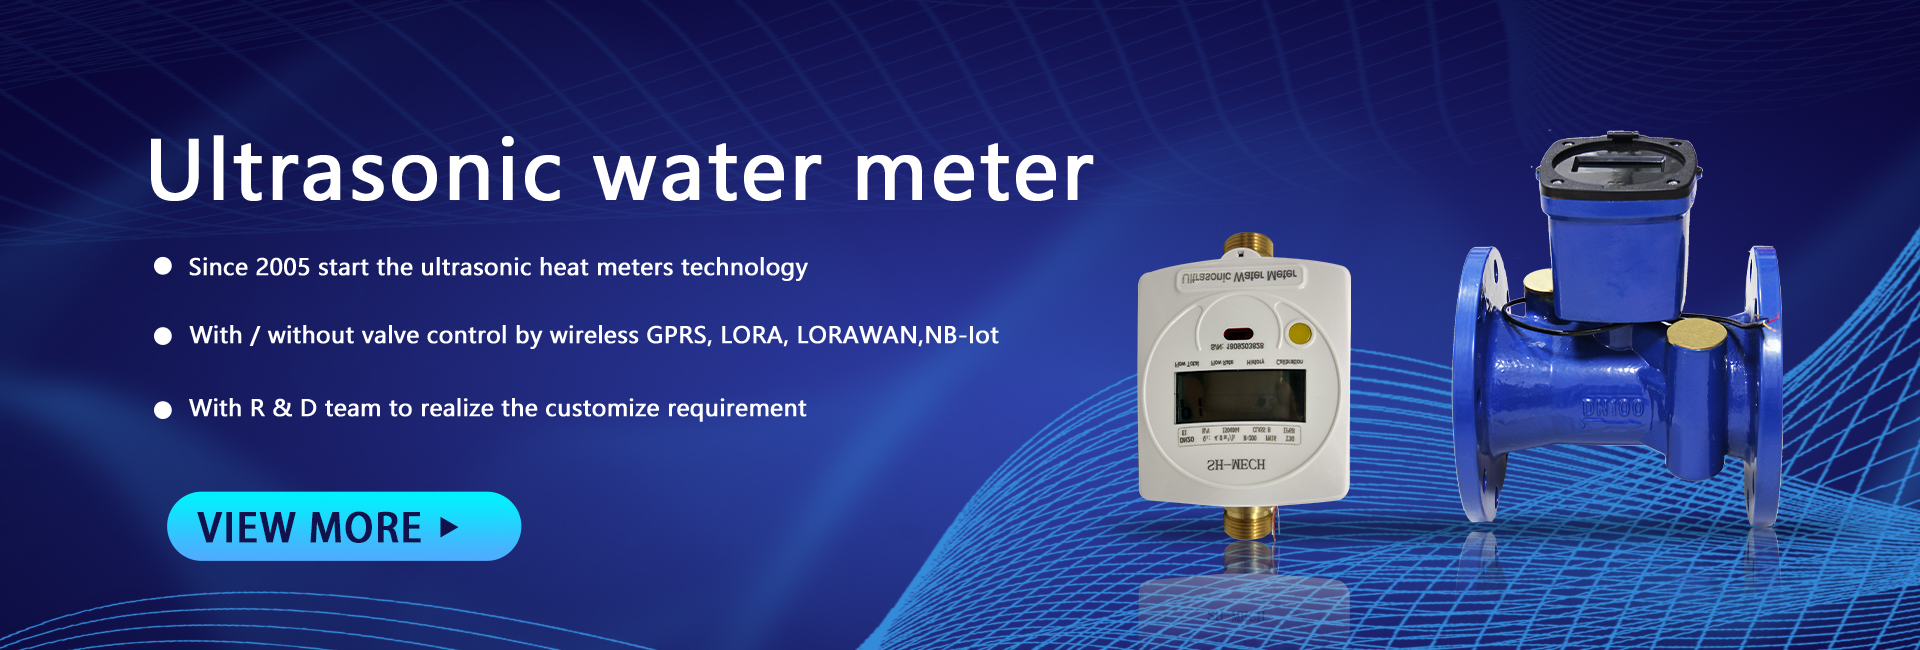 What are the disadvantages of ultrasonic water meters?